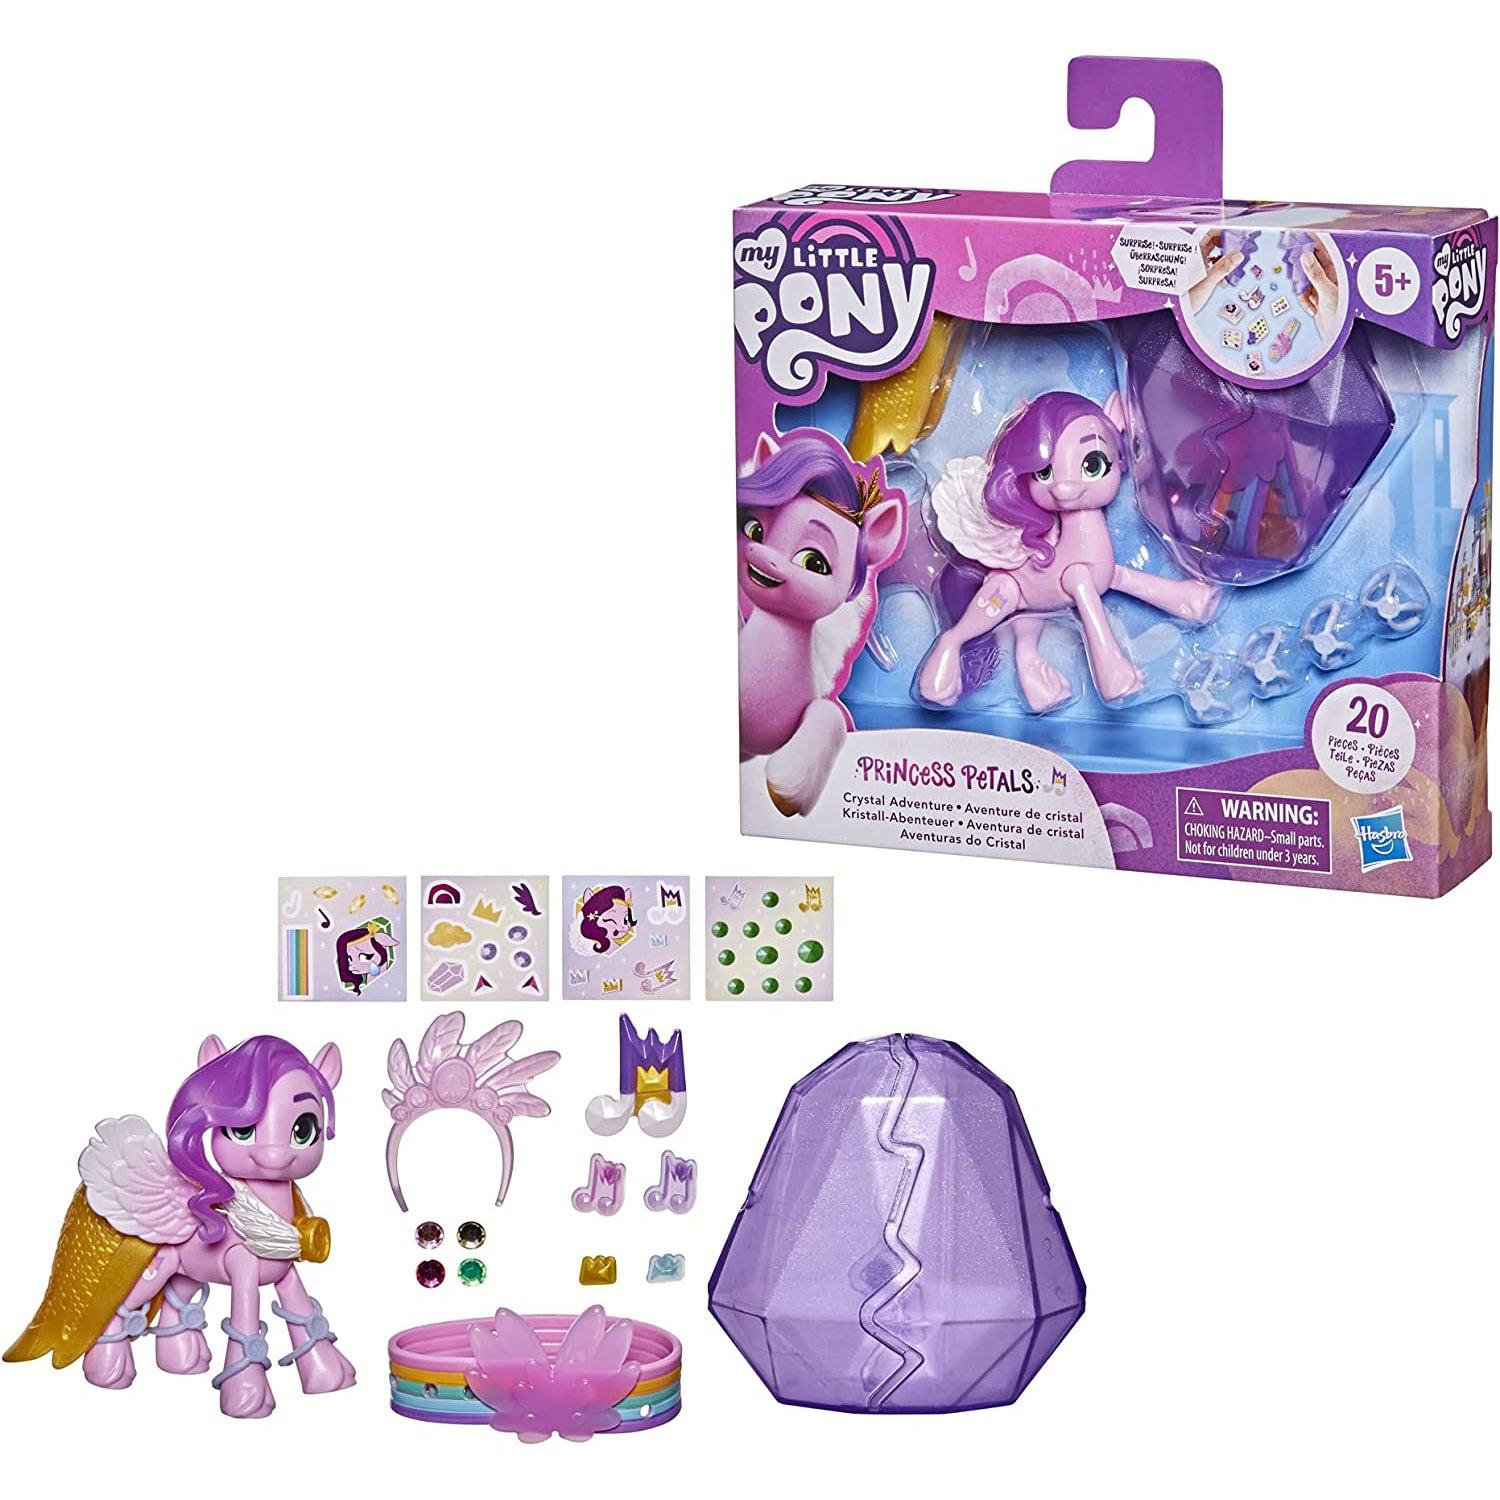 New My Little Pony Plushies by Hasbro Appear